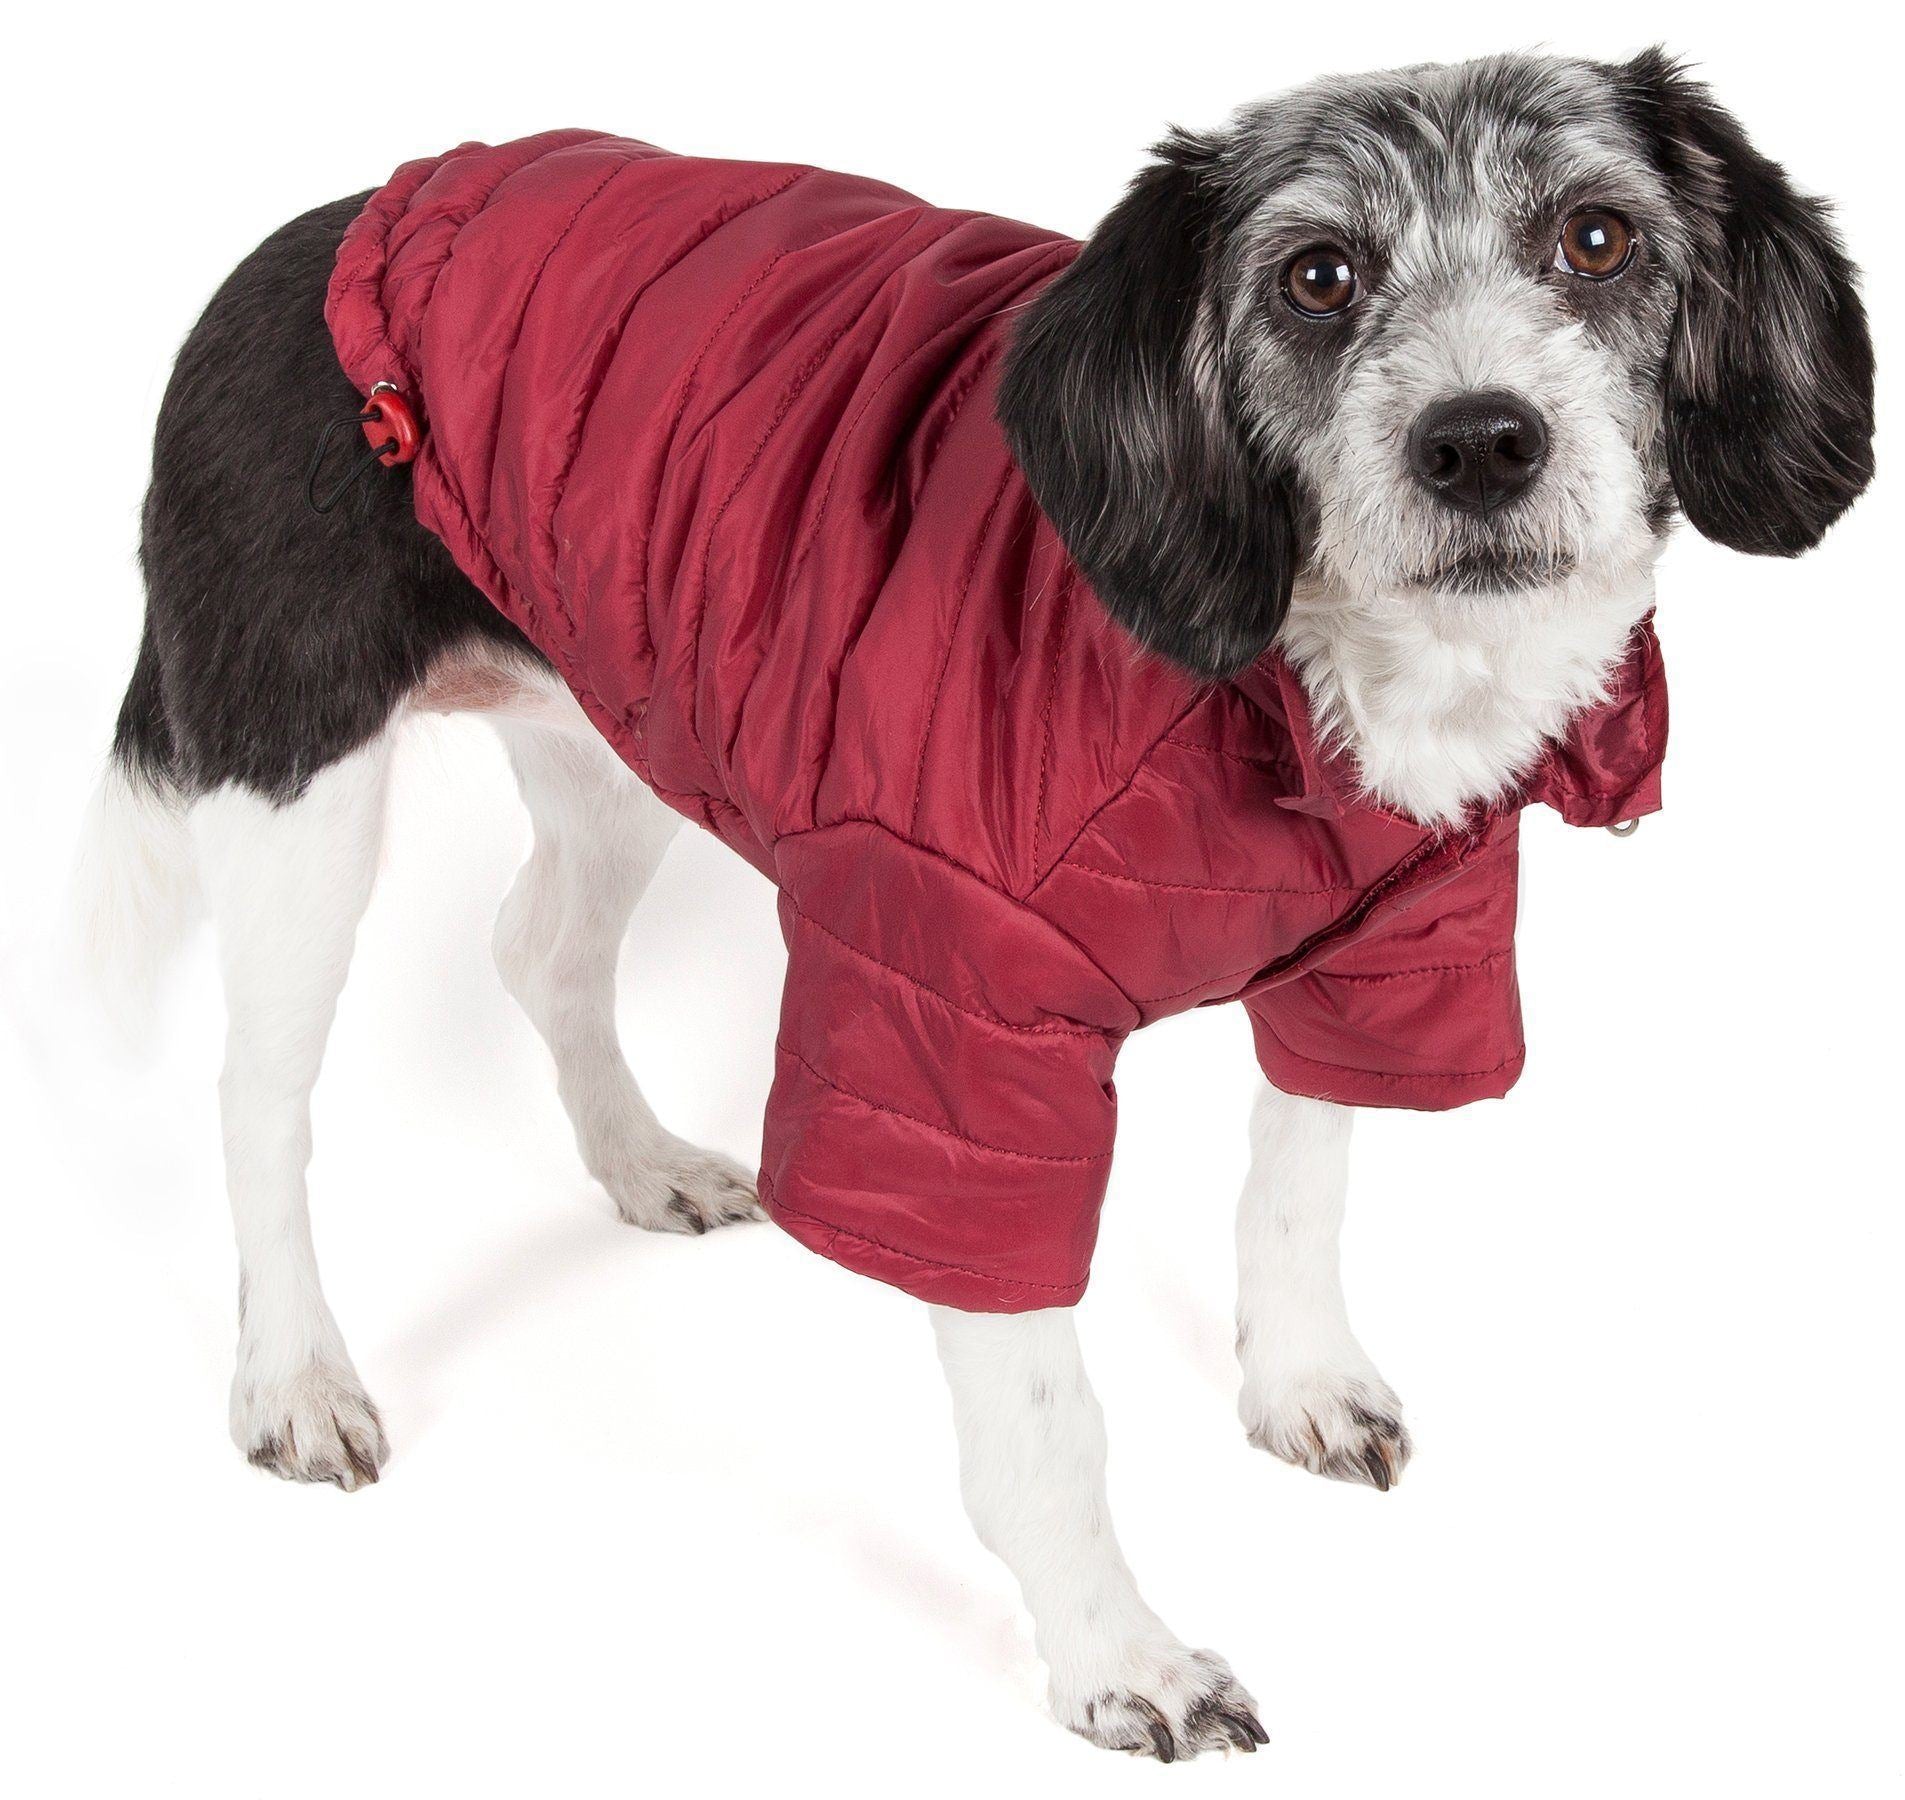 Pet Life ® Lightweight Adjustable and Collapsible 'Sporty Avalanche' Dog Coat w/ Pop-out Zippered Hood X-Small Burgundy Red